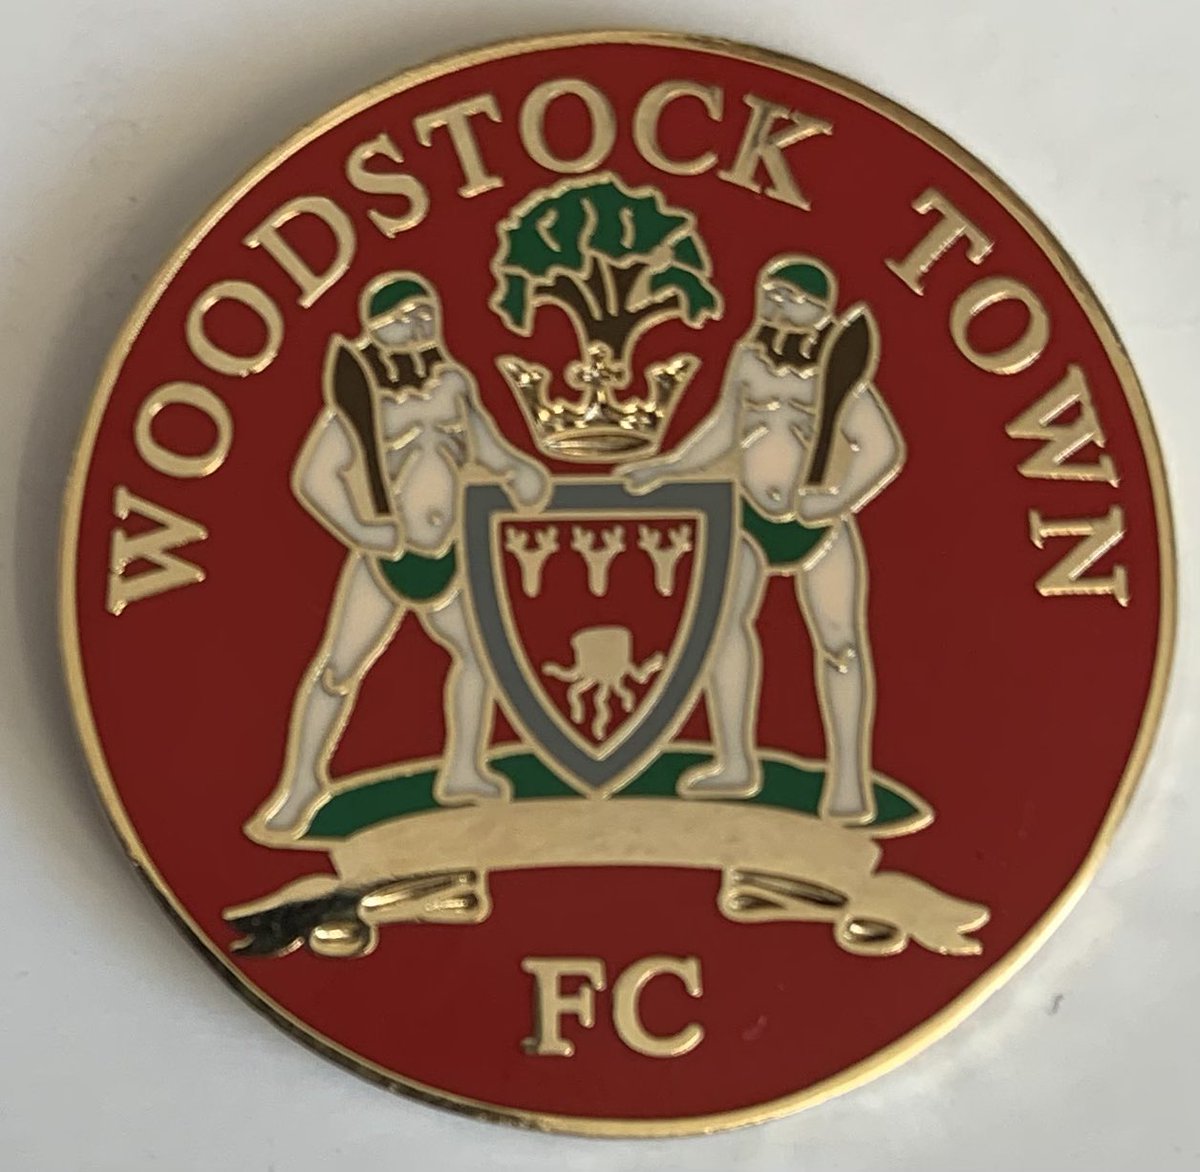 Past and present badges produced.